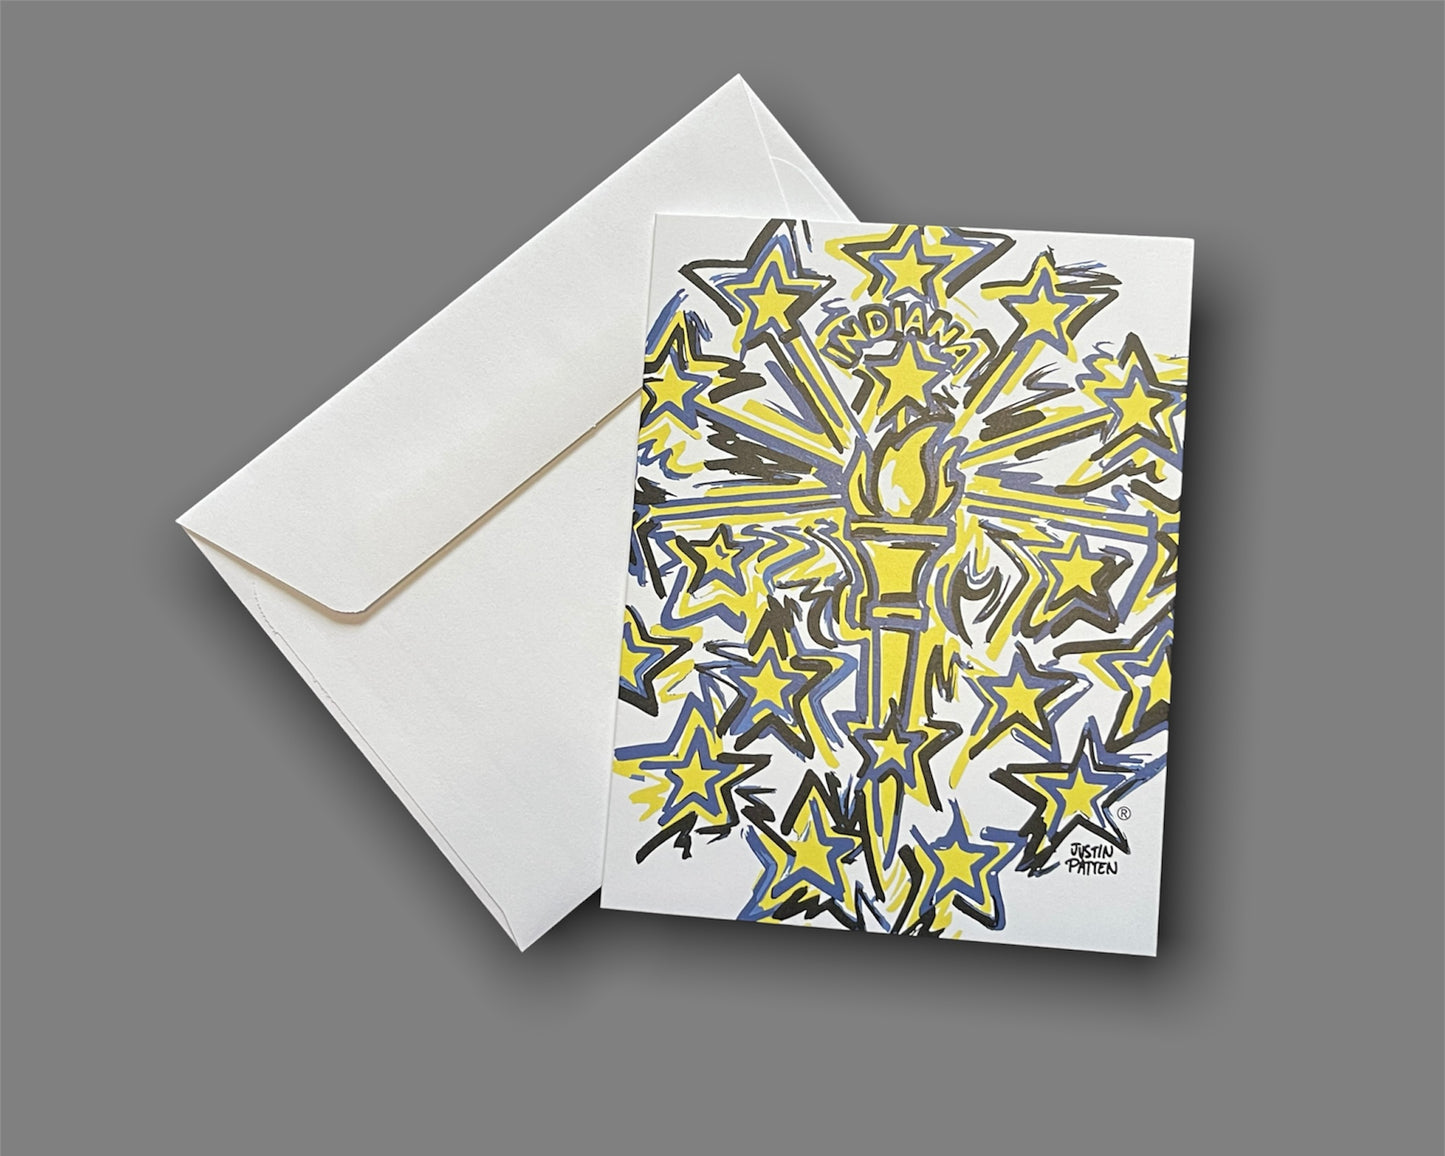 Indiana Note Card Set of 6 by Justin Patten